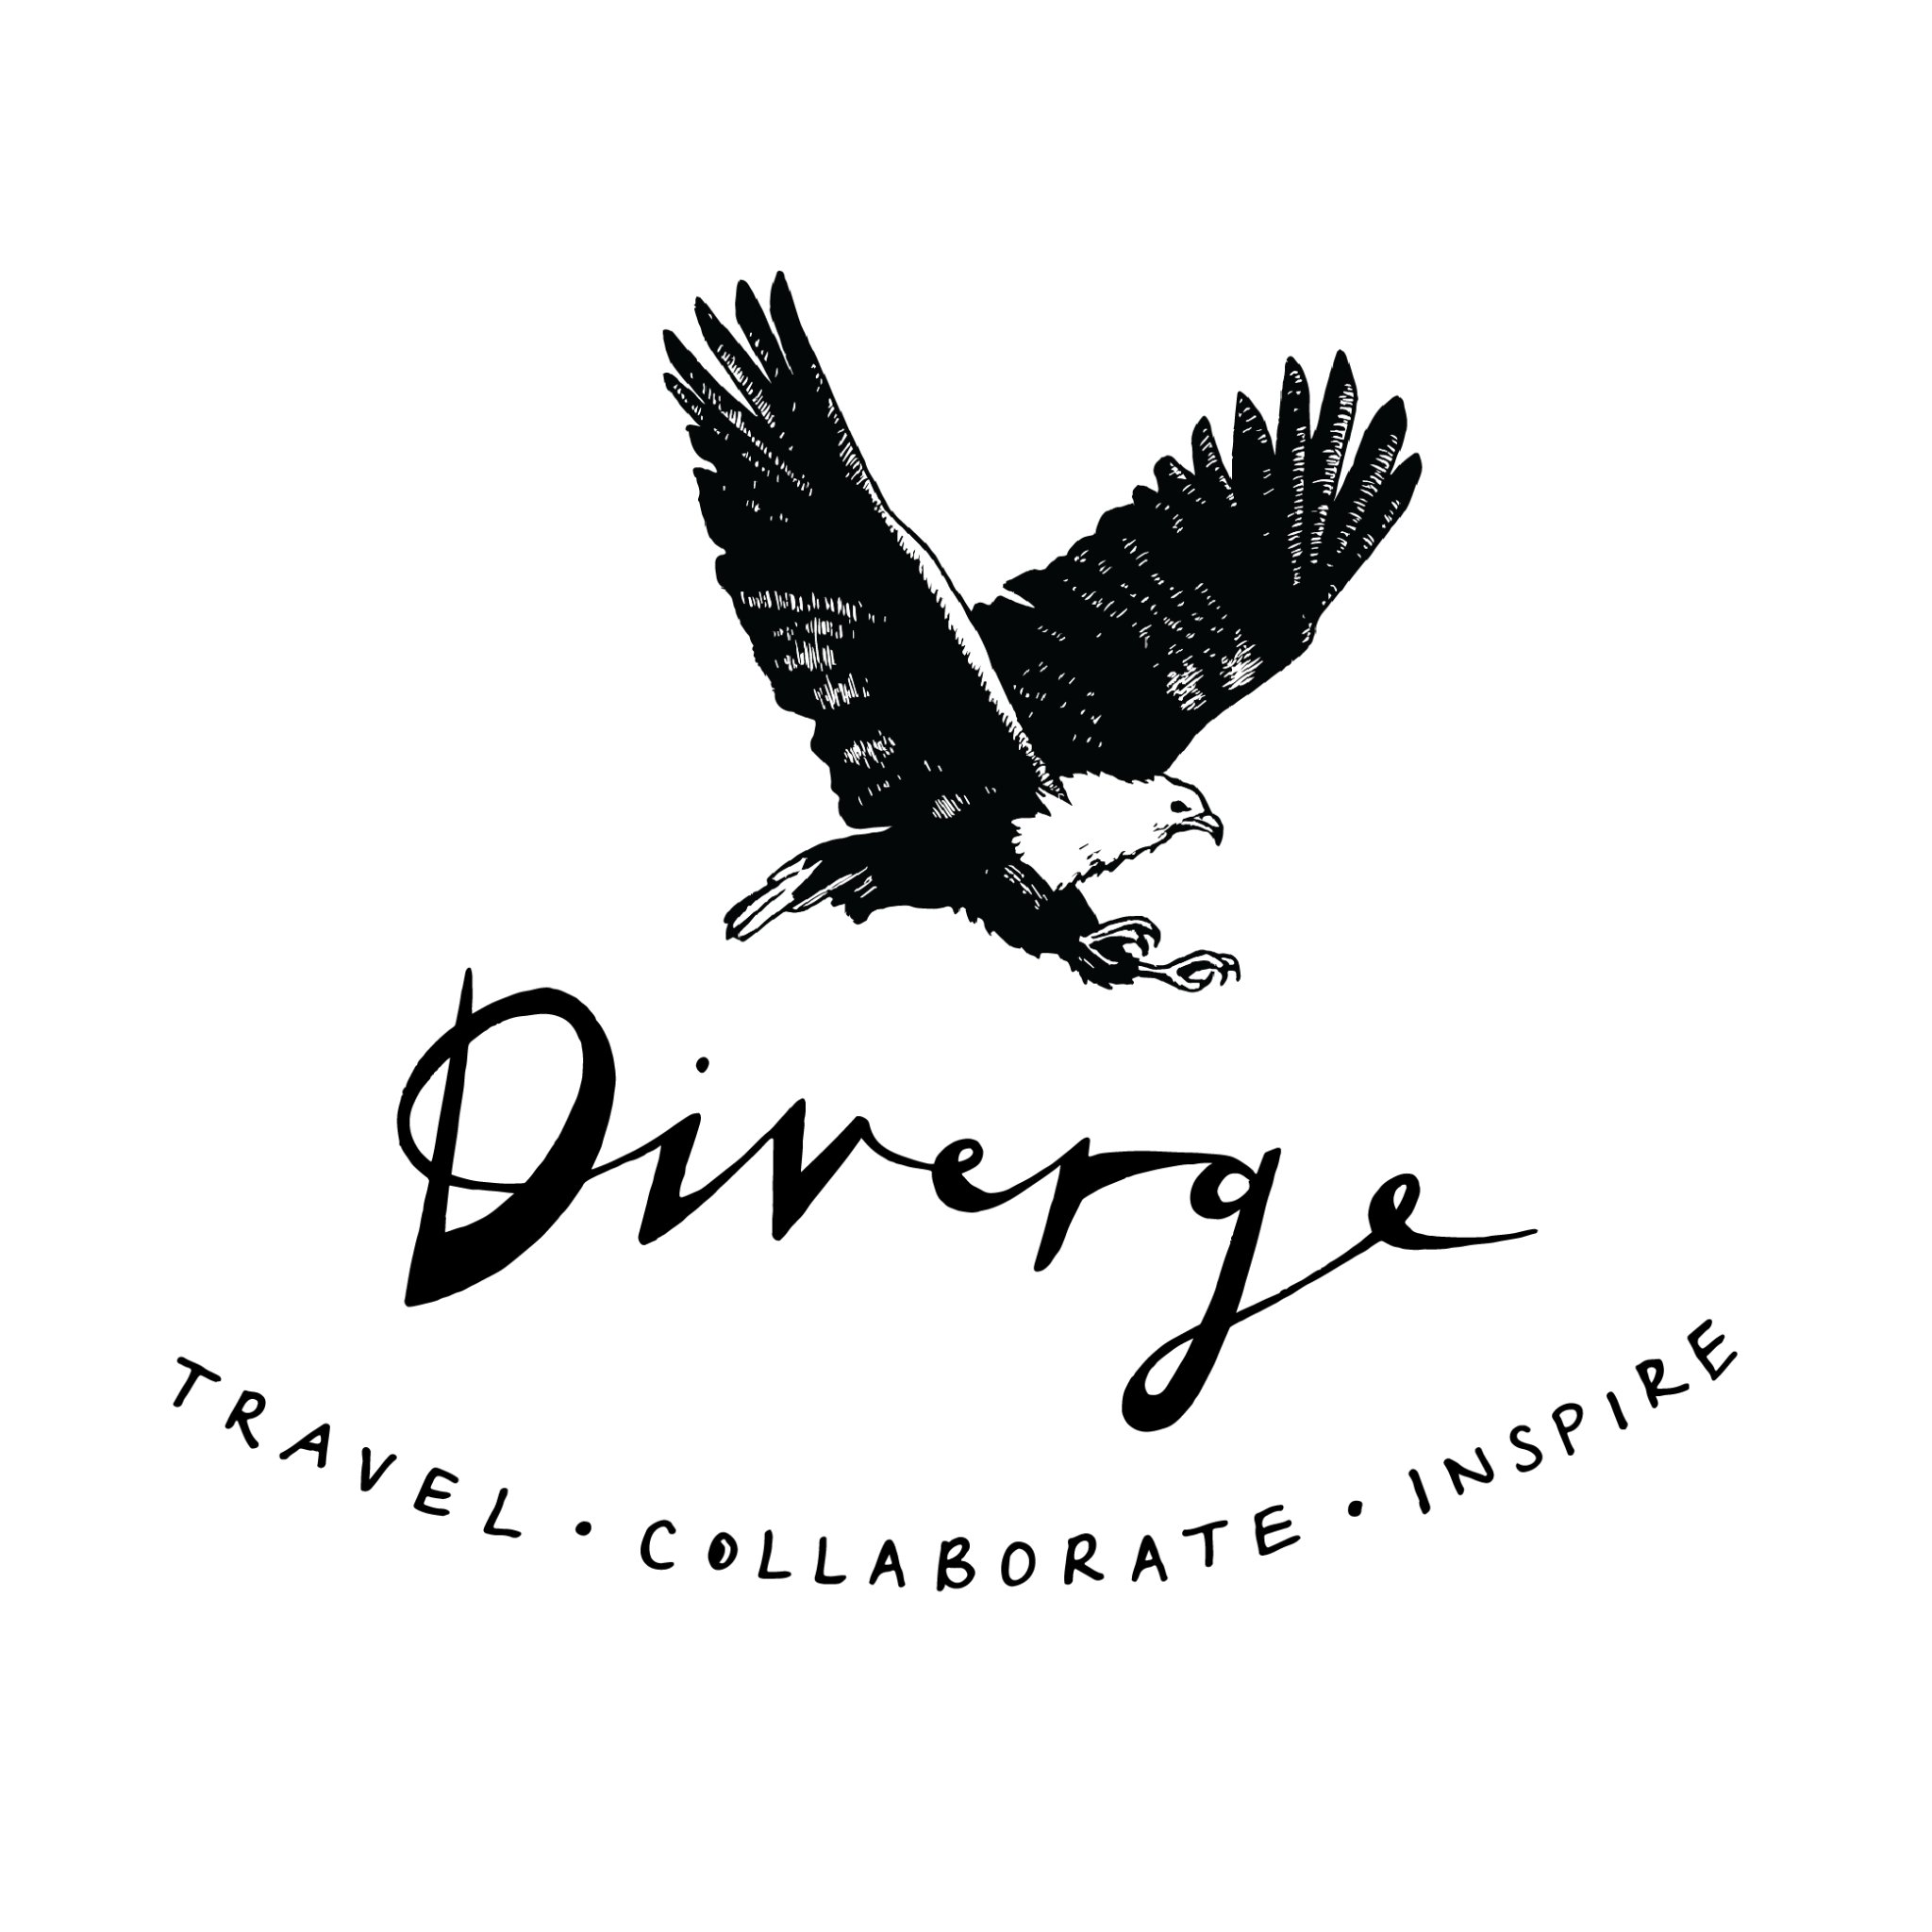 Diverge is an adventure lifestyle portal which aims to inspire you to seek adventure. Adventure awaits & Diverge will help you discover it.